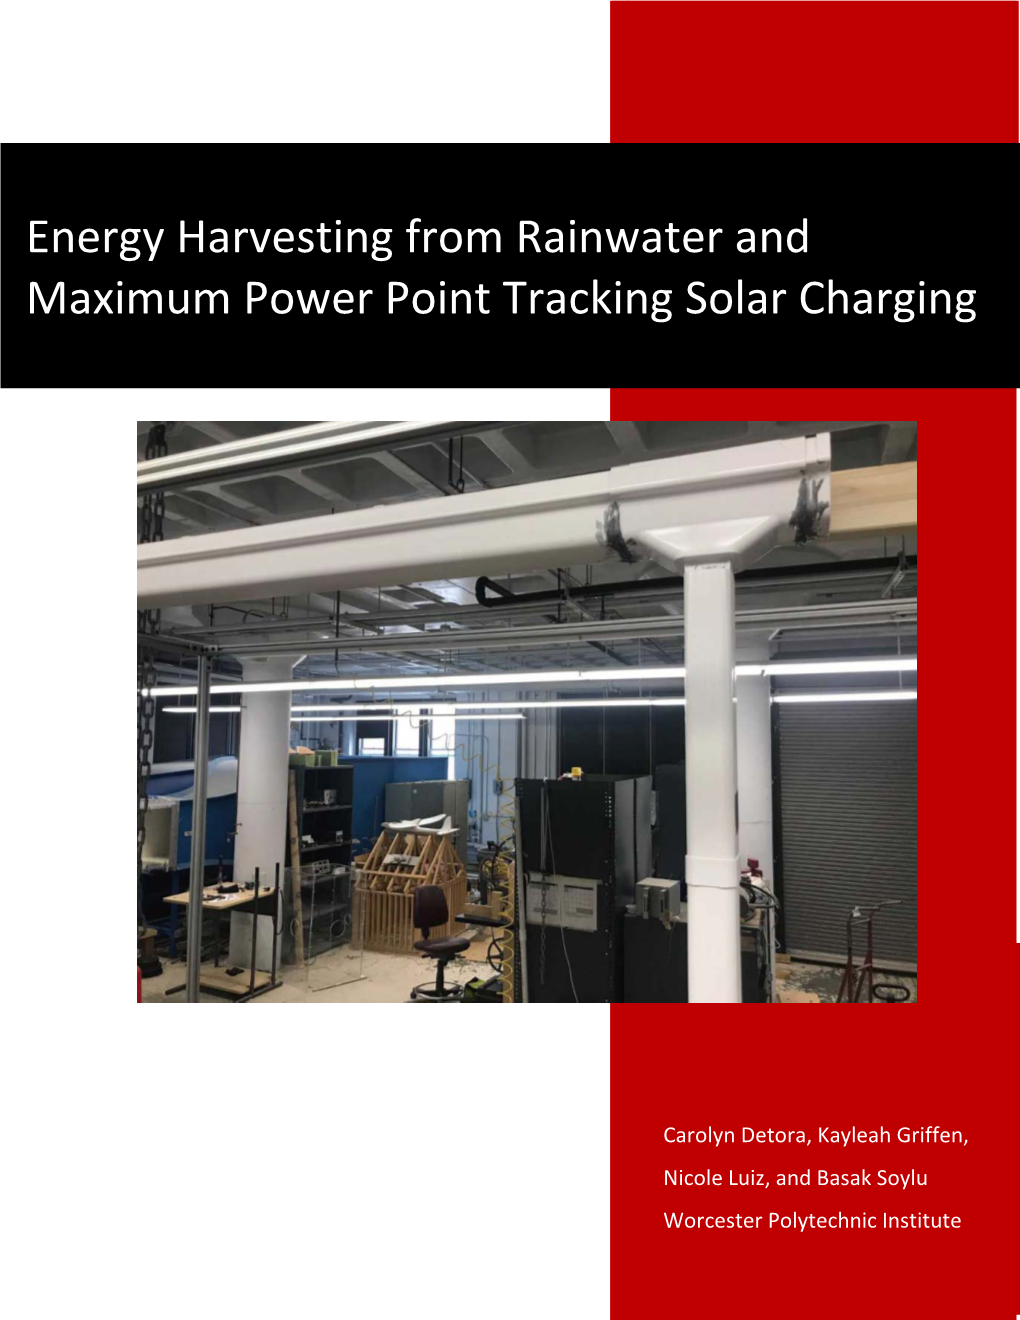 Energy Harvesting from Rainwater and Maximum Power Point Tracking Solar Charging